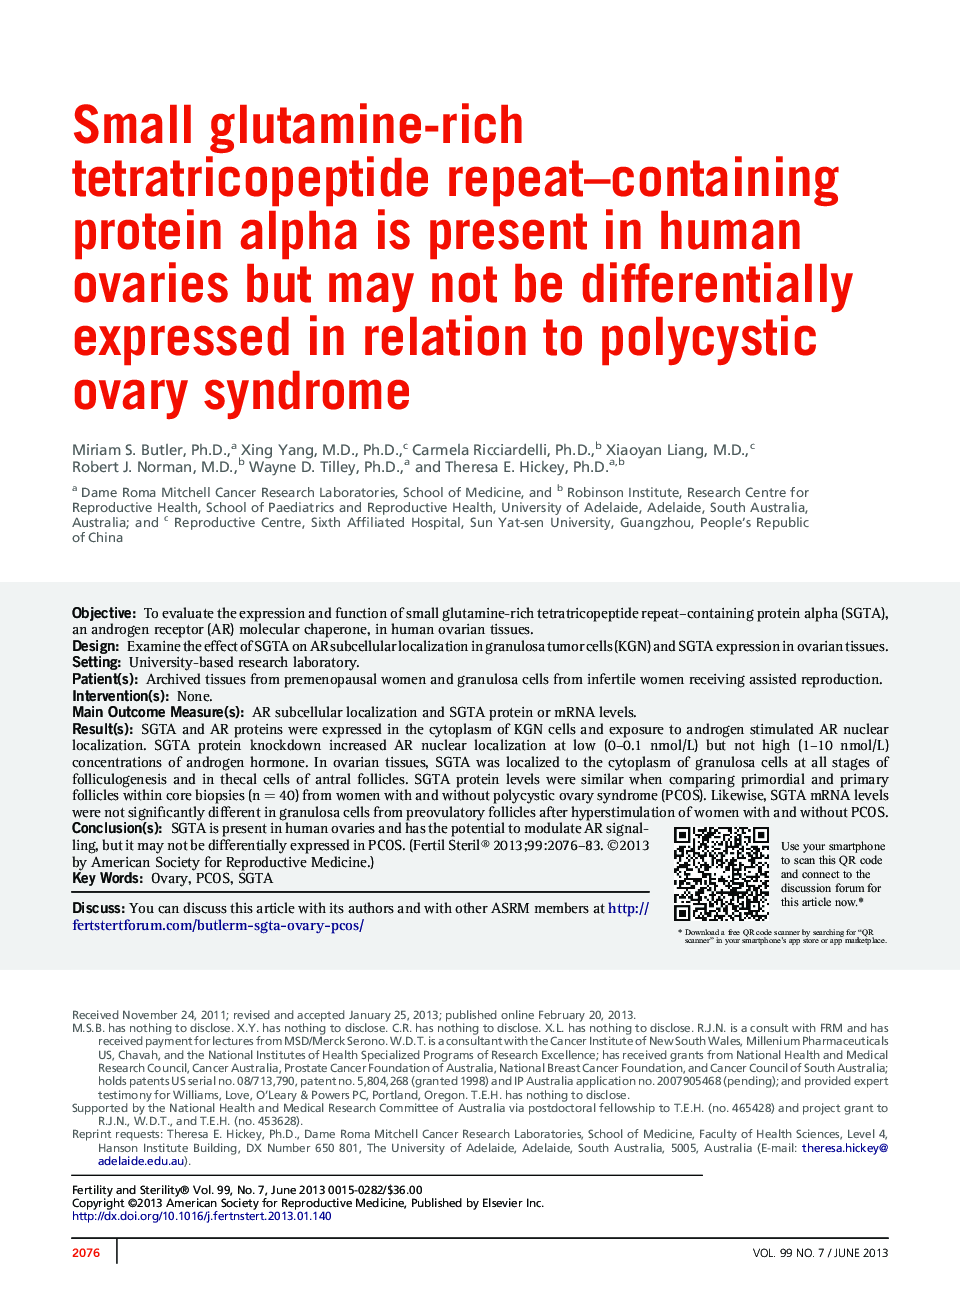 Small glutamine-rich tetratricopeptide repeat-containing protein alpha is present in human ovaries but may not be differentially expressed in relation to polycystic ovary syndrome